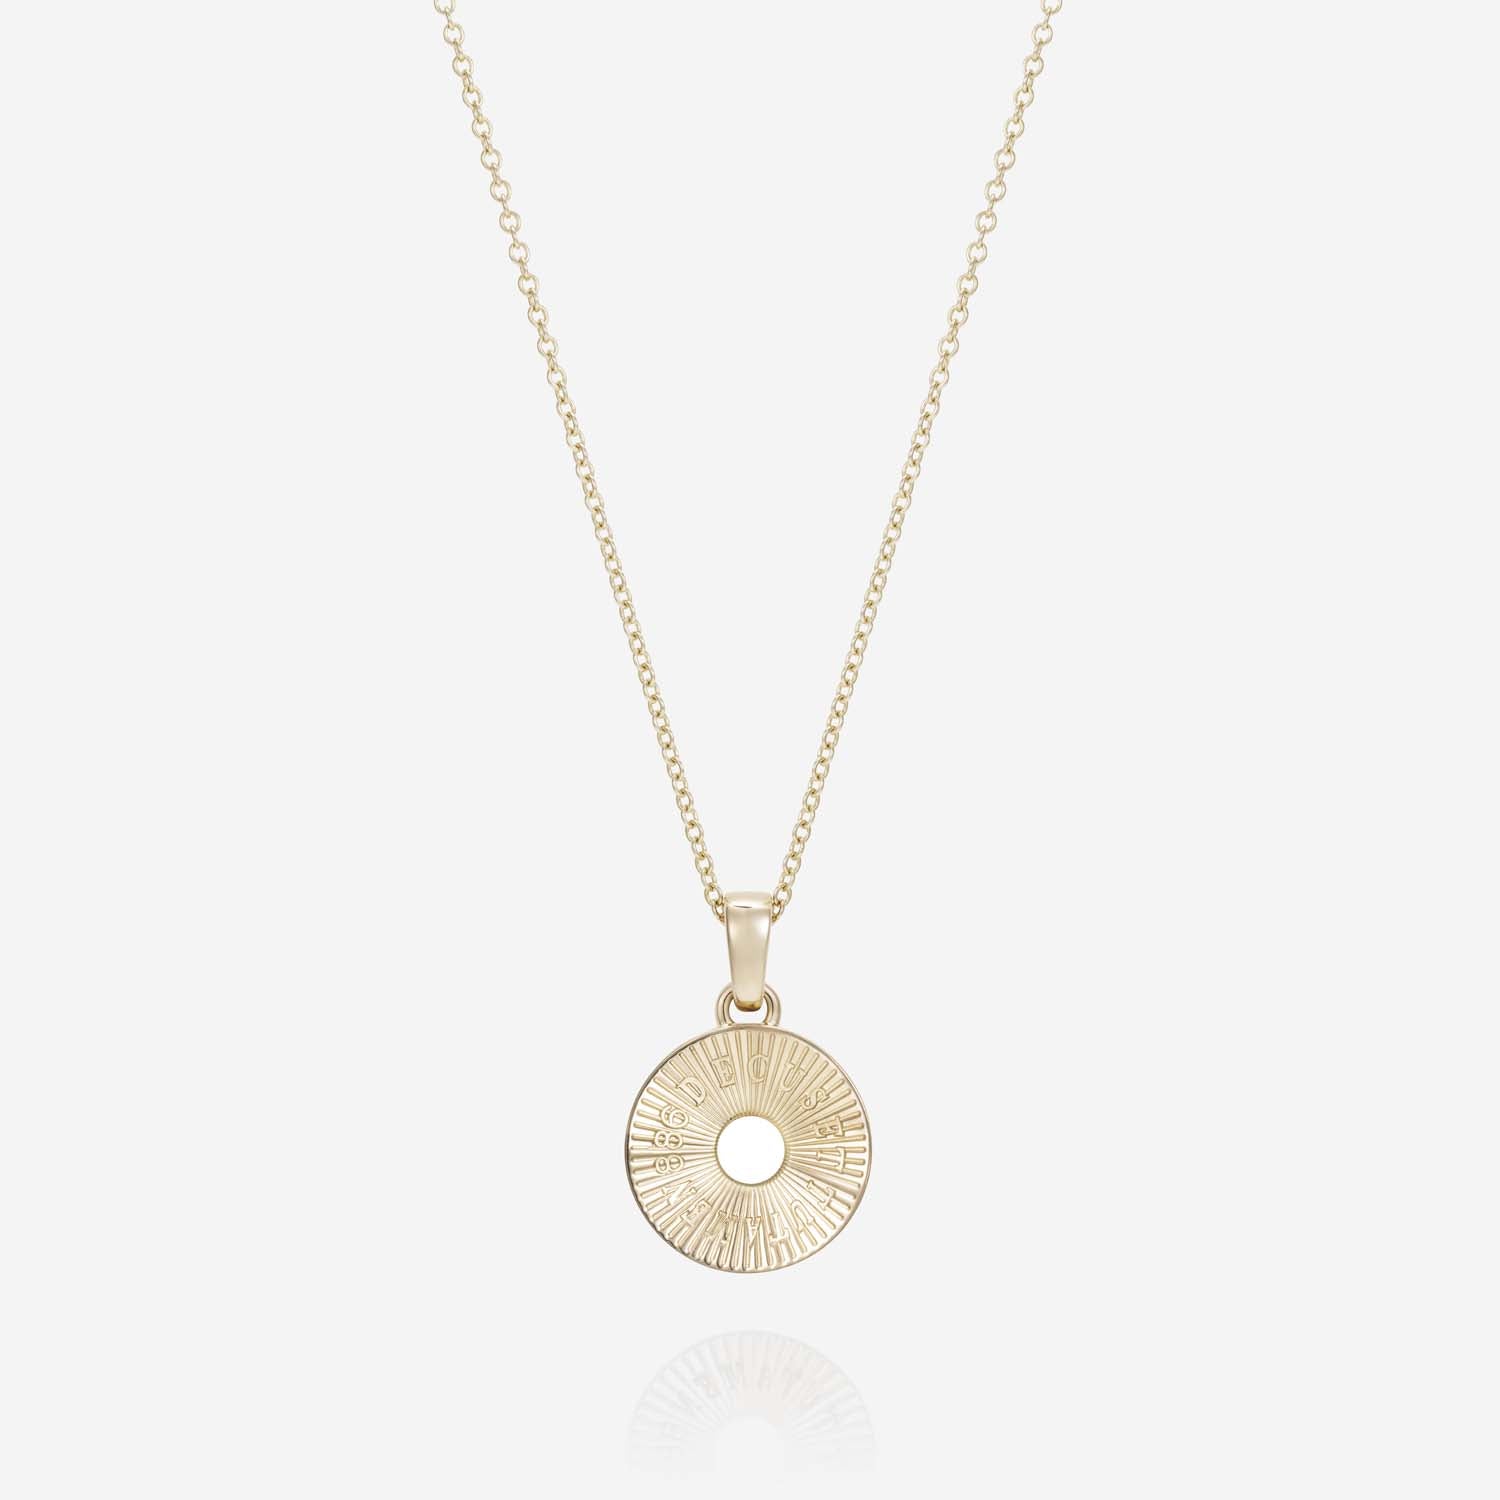 886 Royal Mint Necklaces Tutamen Round Pendant with Chain 9ct Yellow Gold